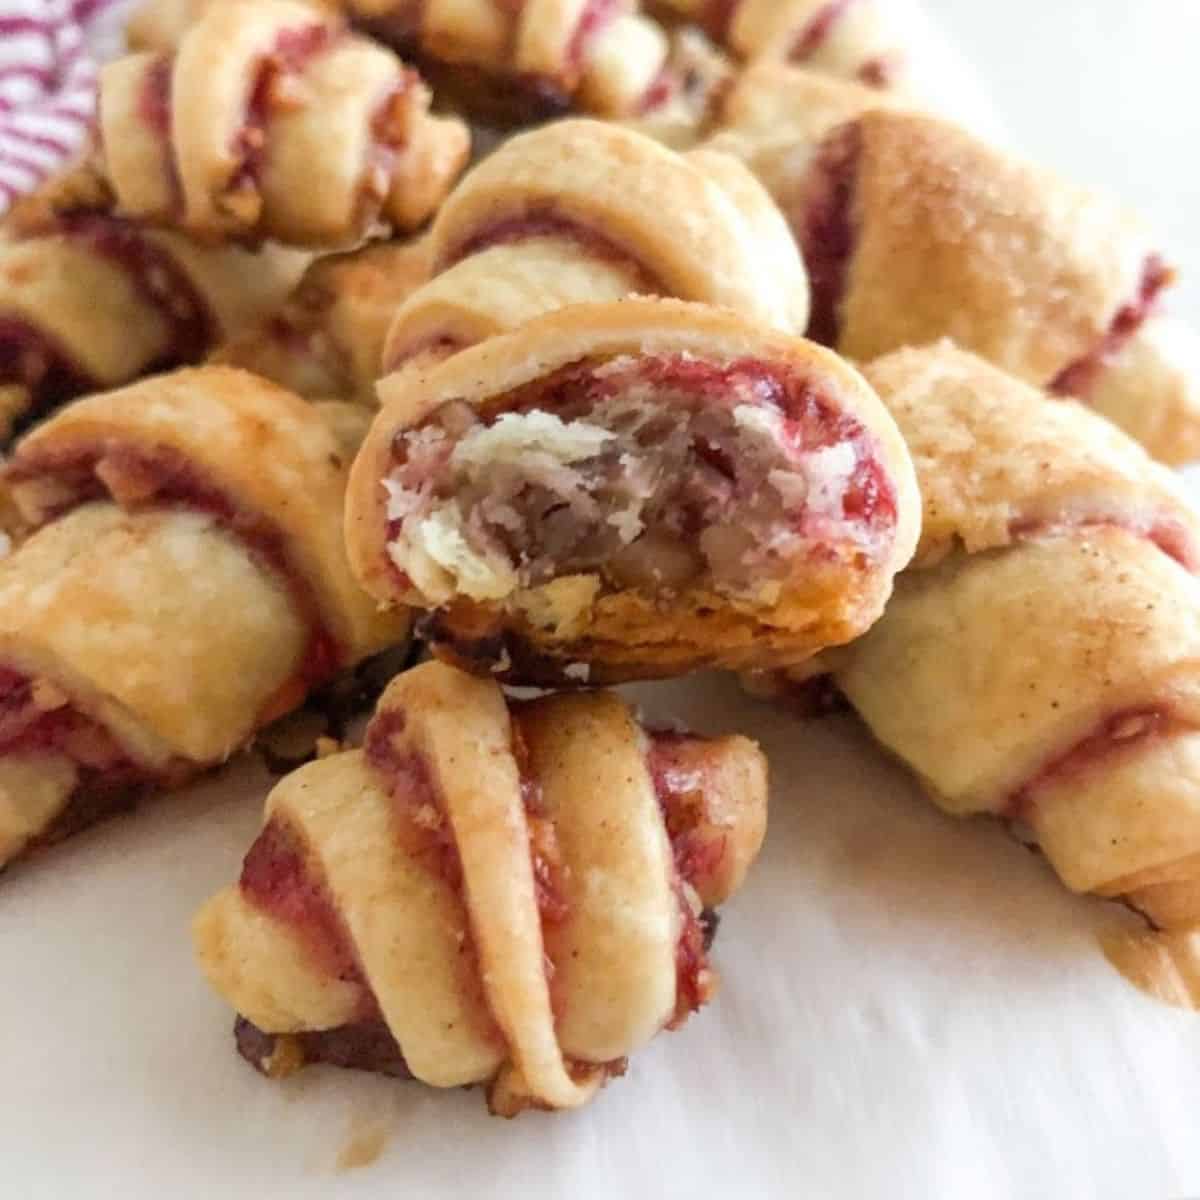 Baked rugelach arranged on parchment paper with one bite taken out of rugelach on top.